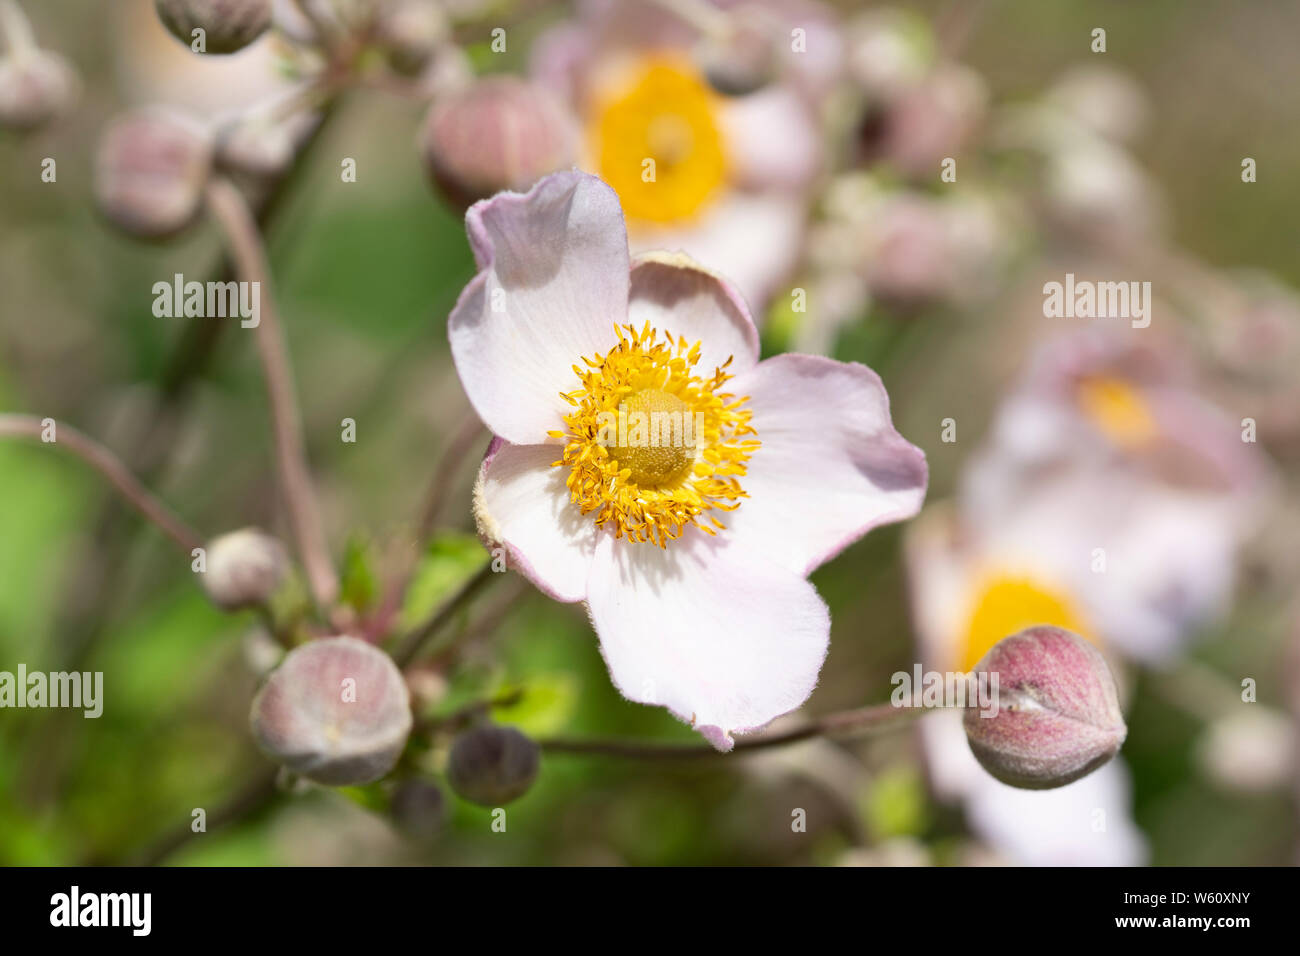 An Anemone hupehensis Ouvertüre flower, or Windflower, (also known as a Japan-Herbst-Anemone in German) growing in Lower Austria, Austria Stock Photo